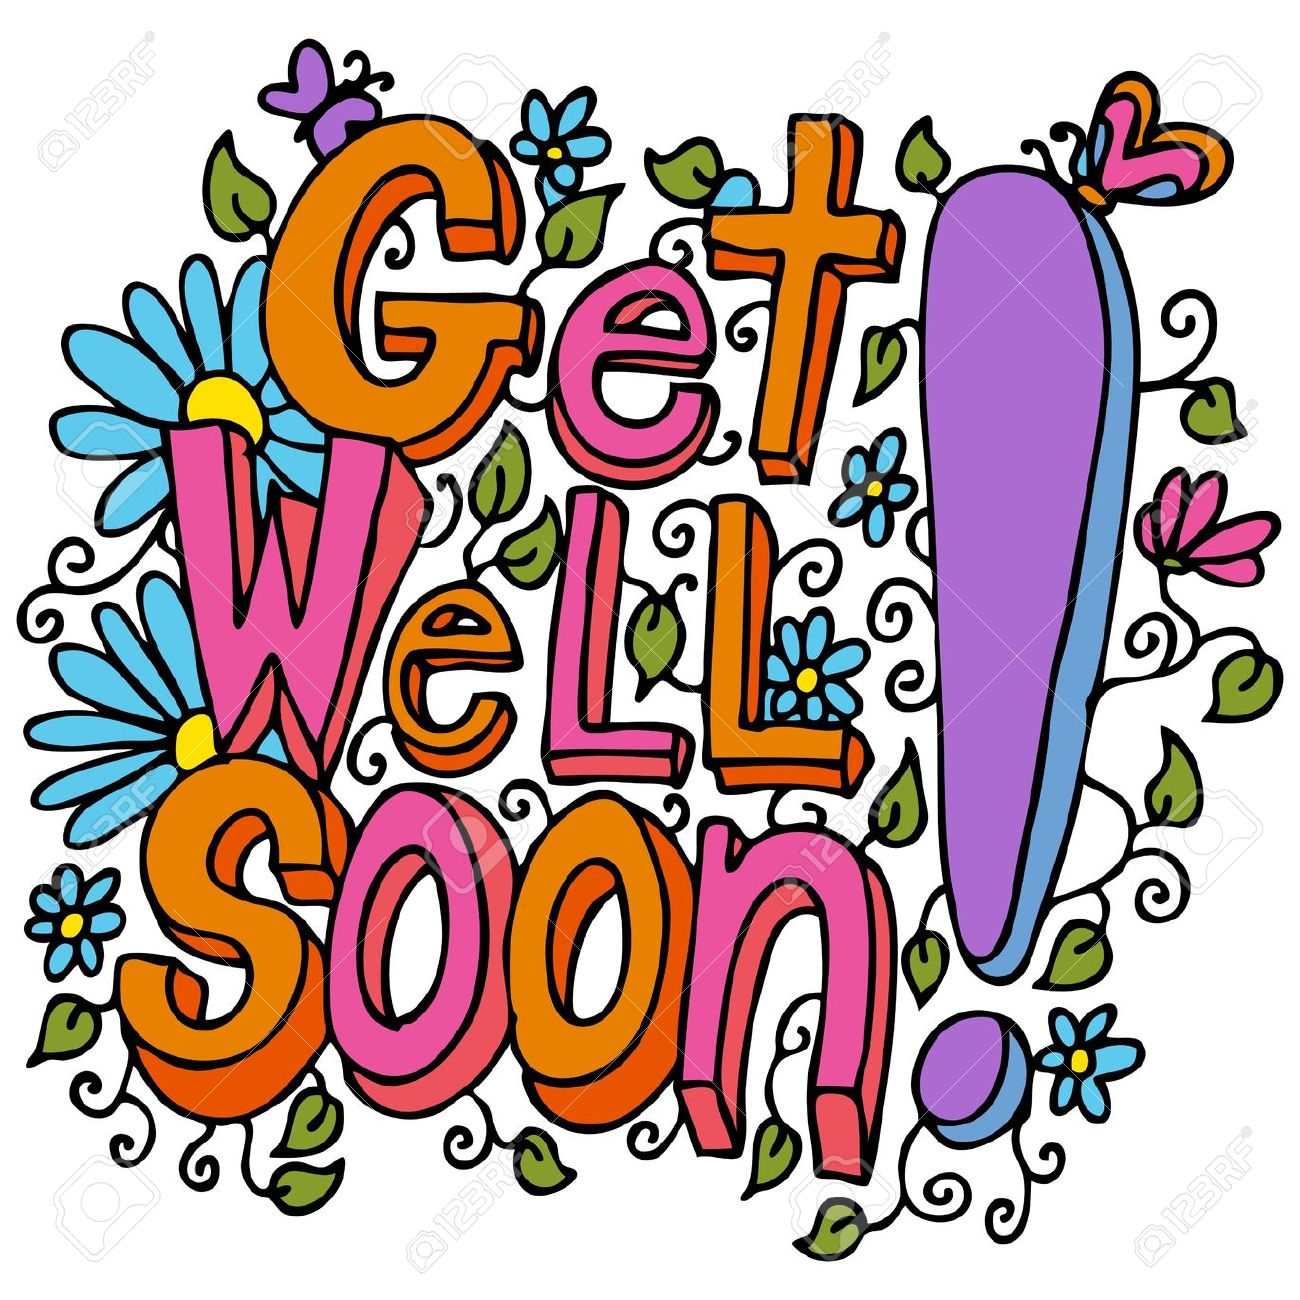 Get well soon clipart free